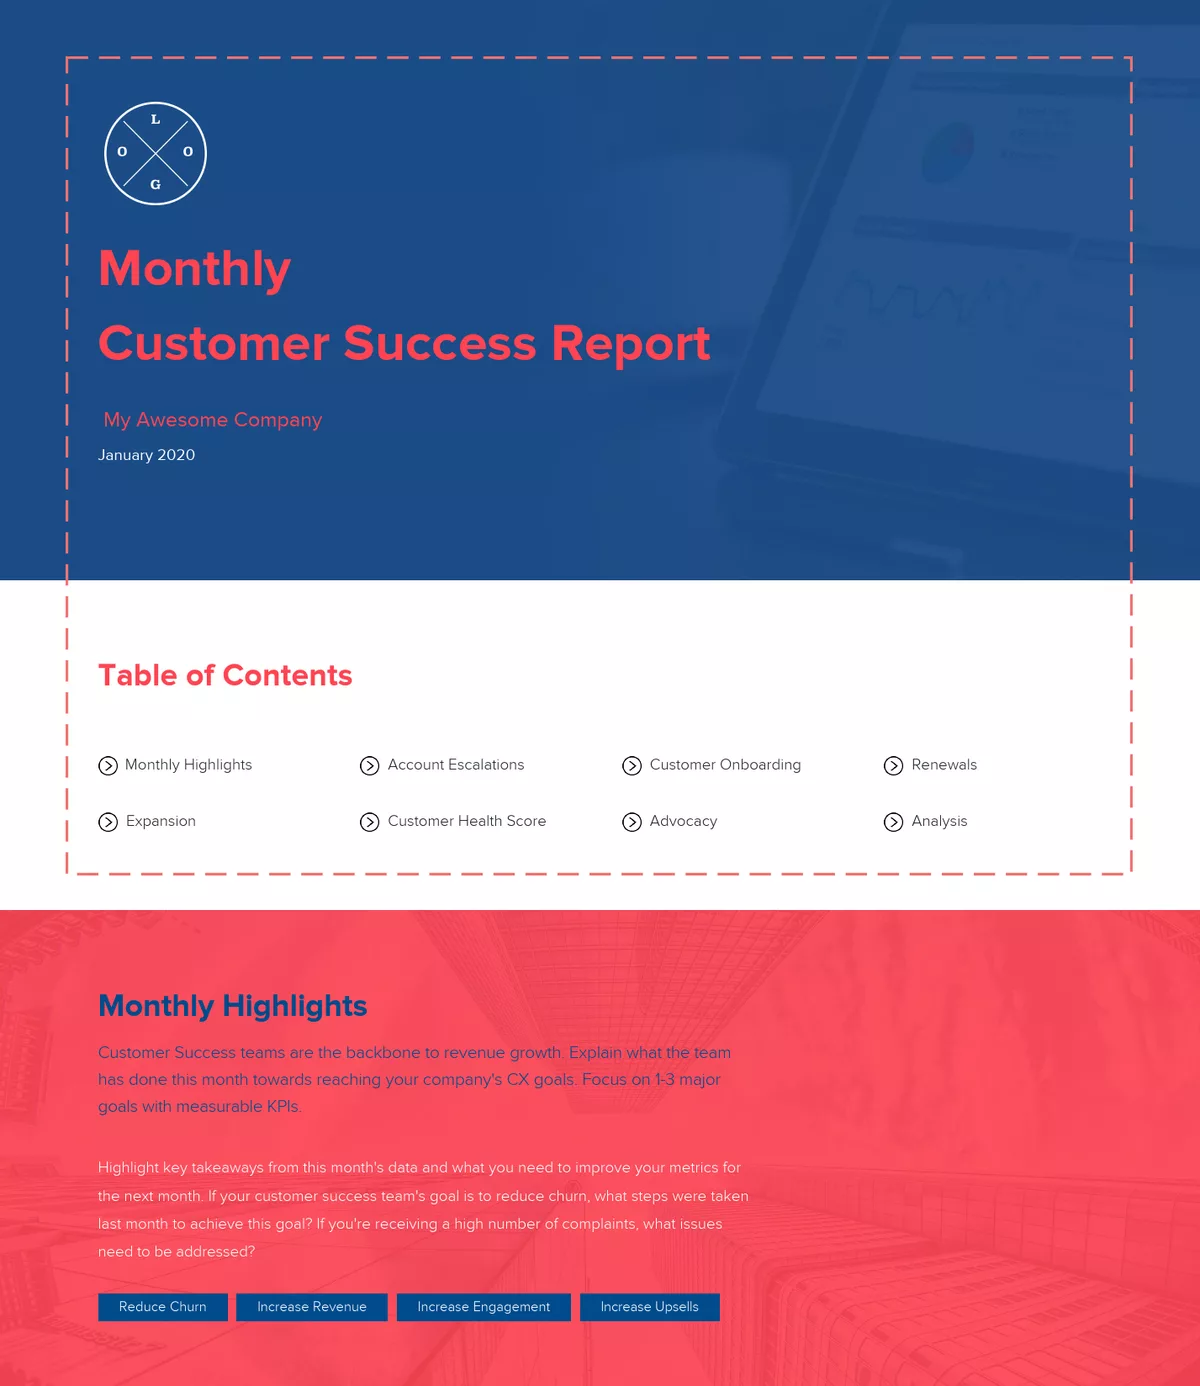 Customer Success Report Header And Table Of Contents